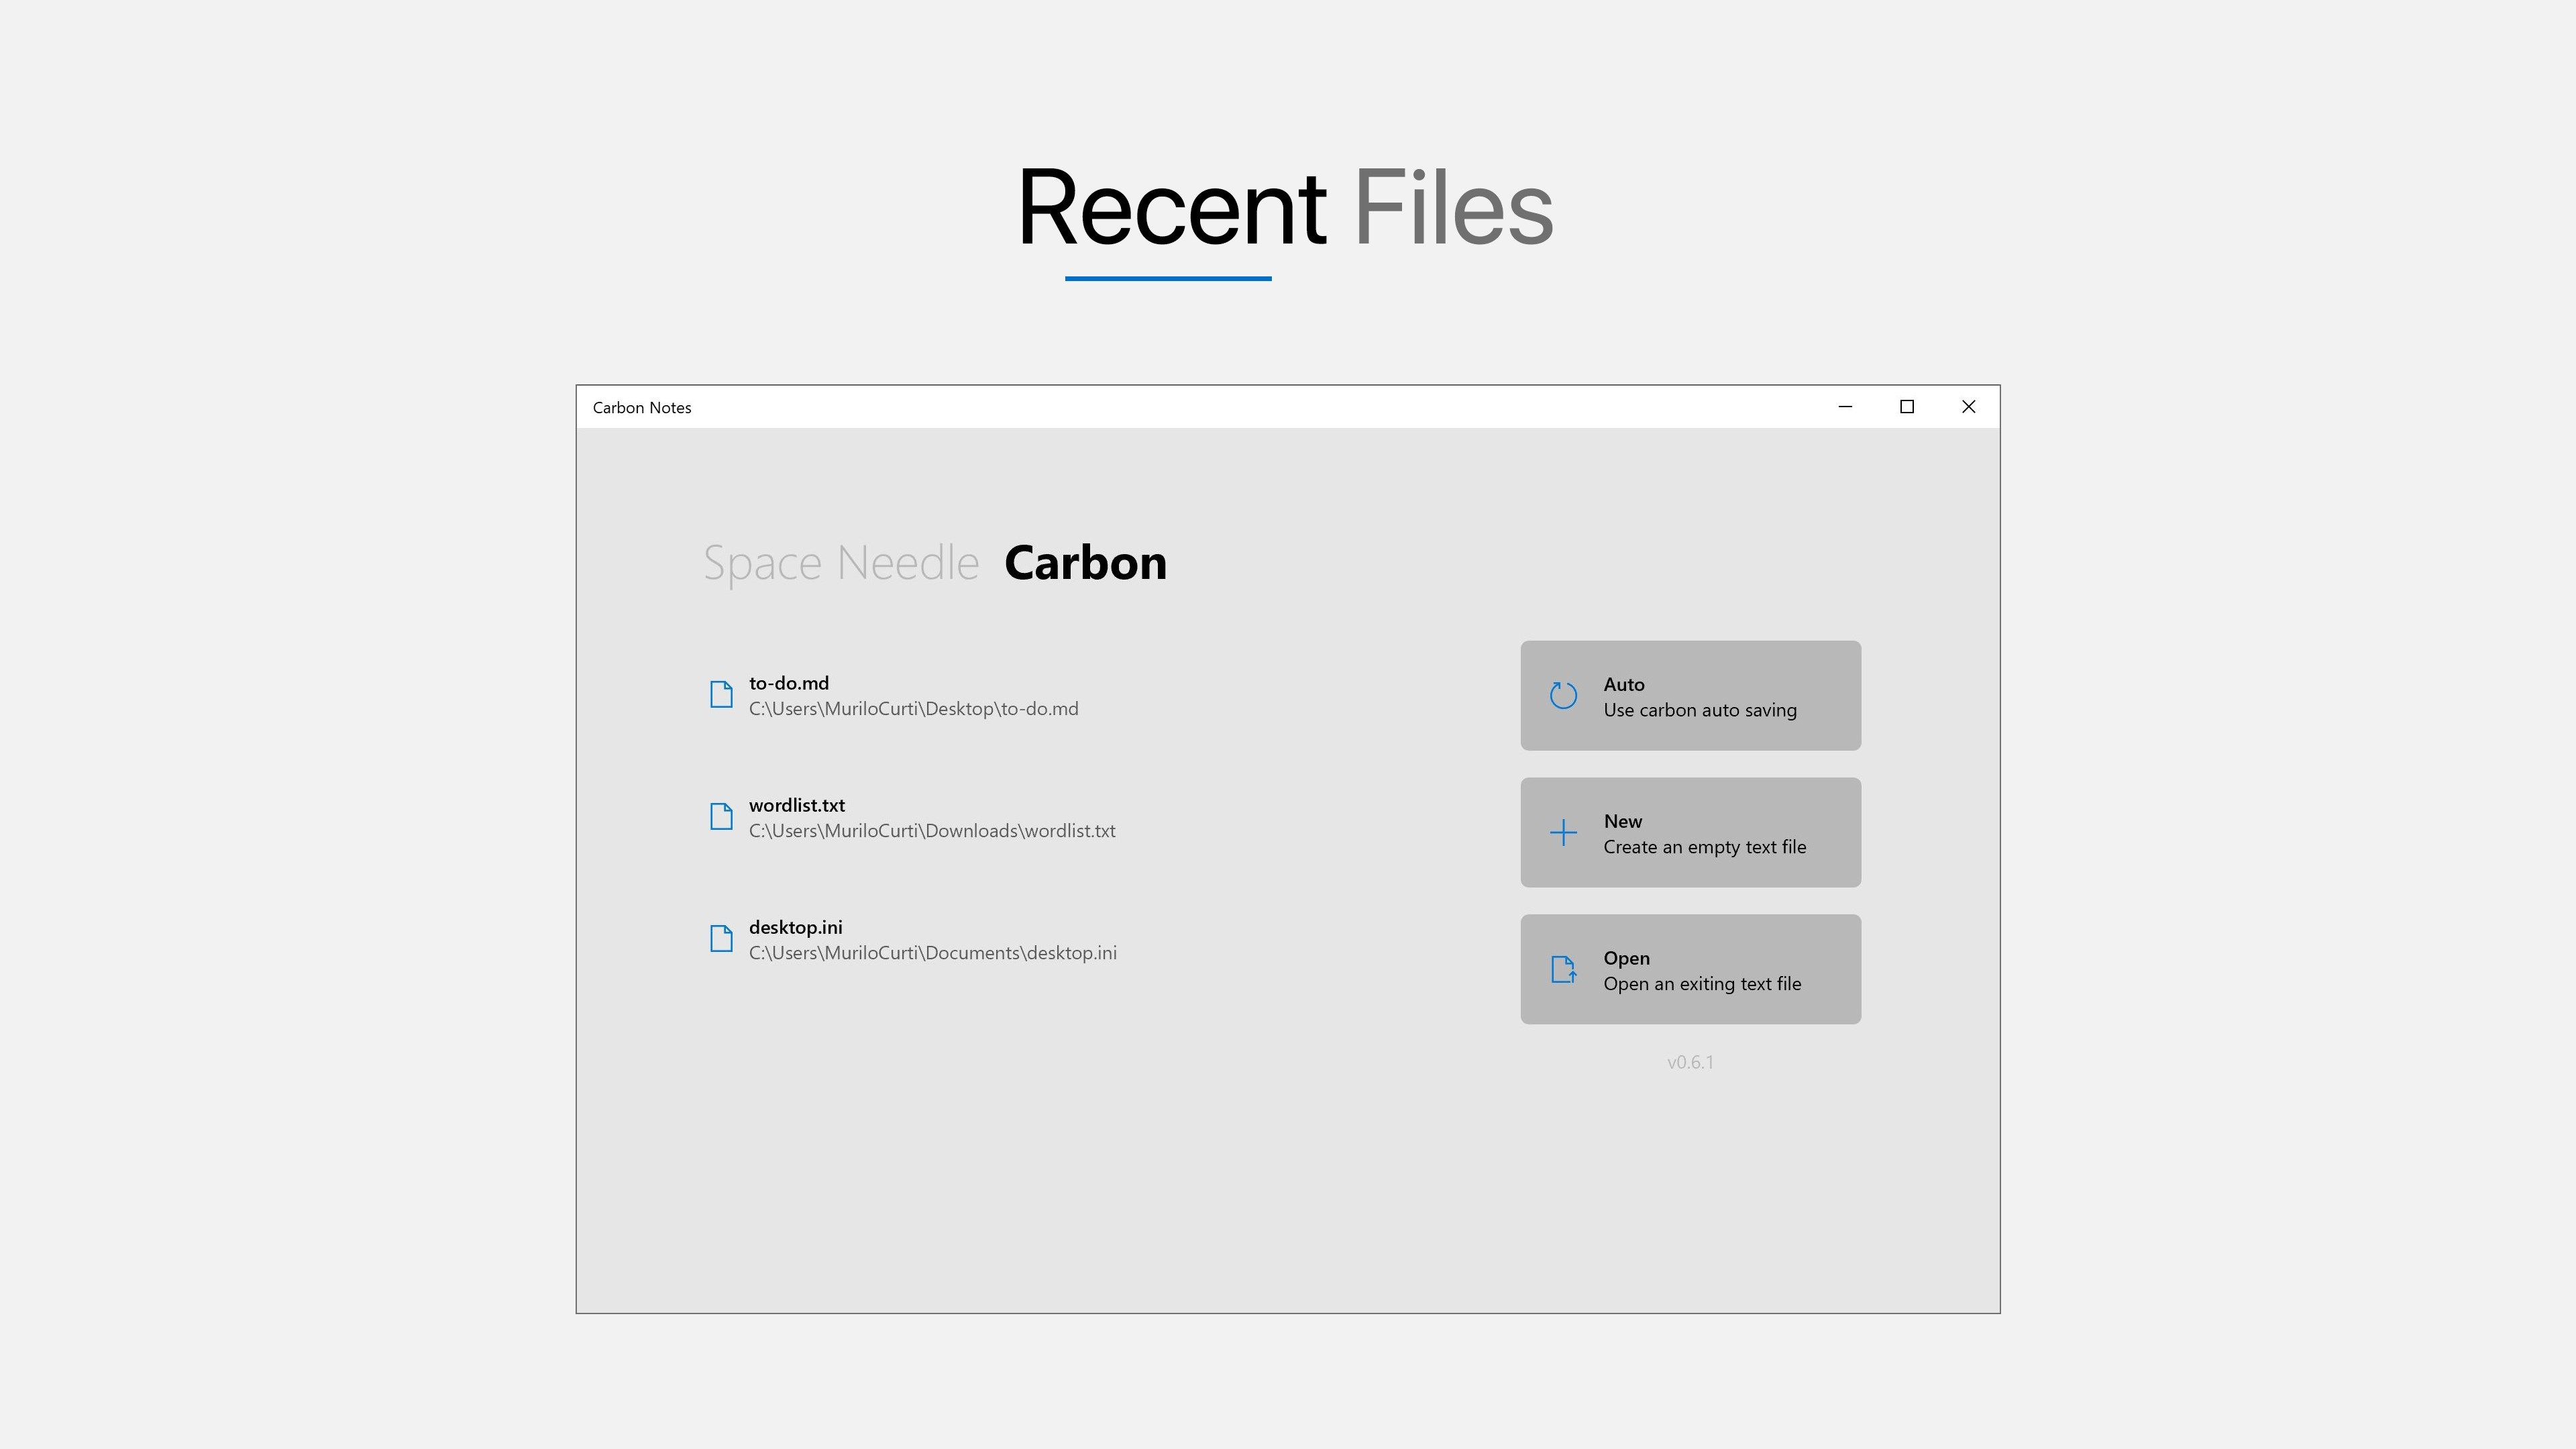 Easily find your favorite files with the start recent files list.